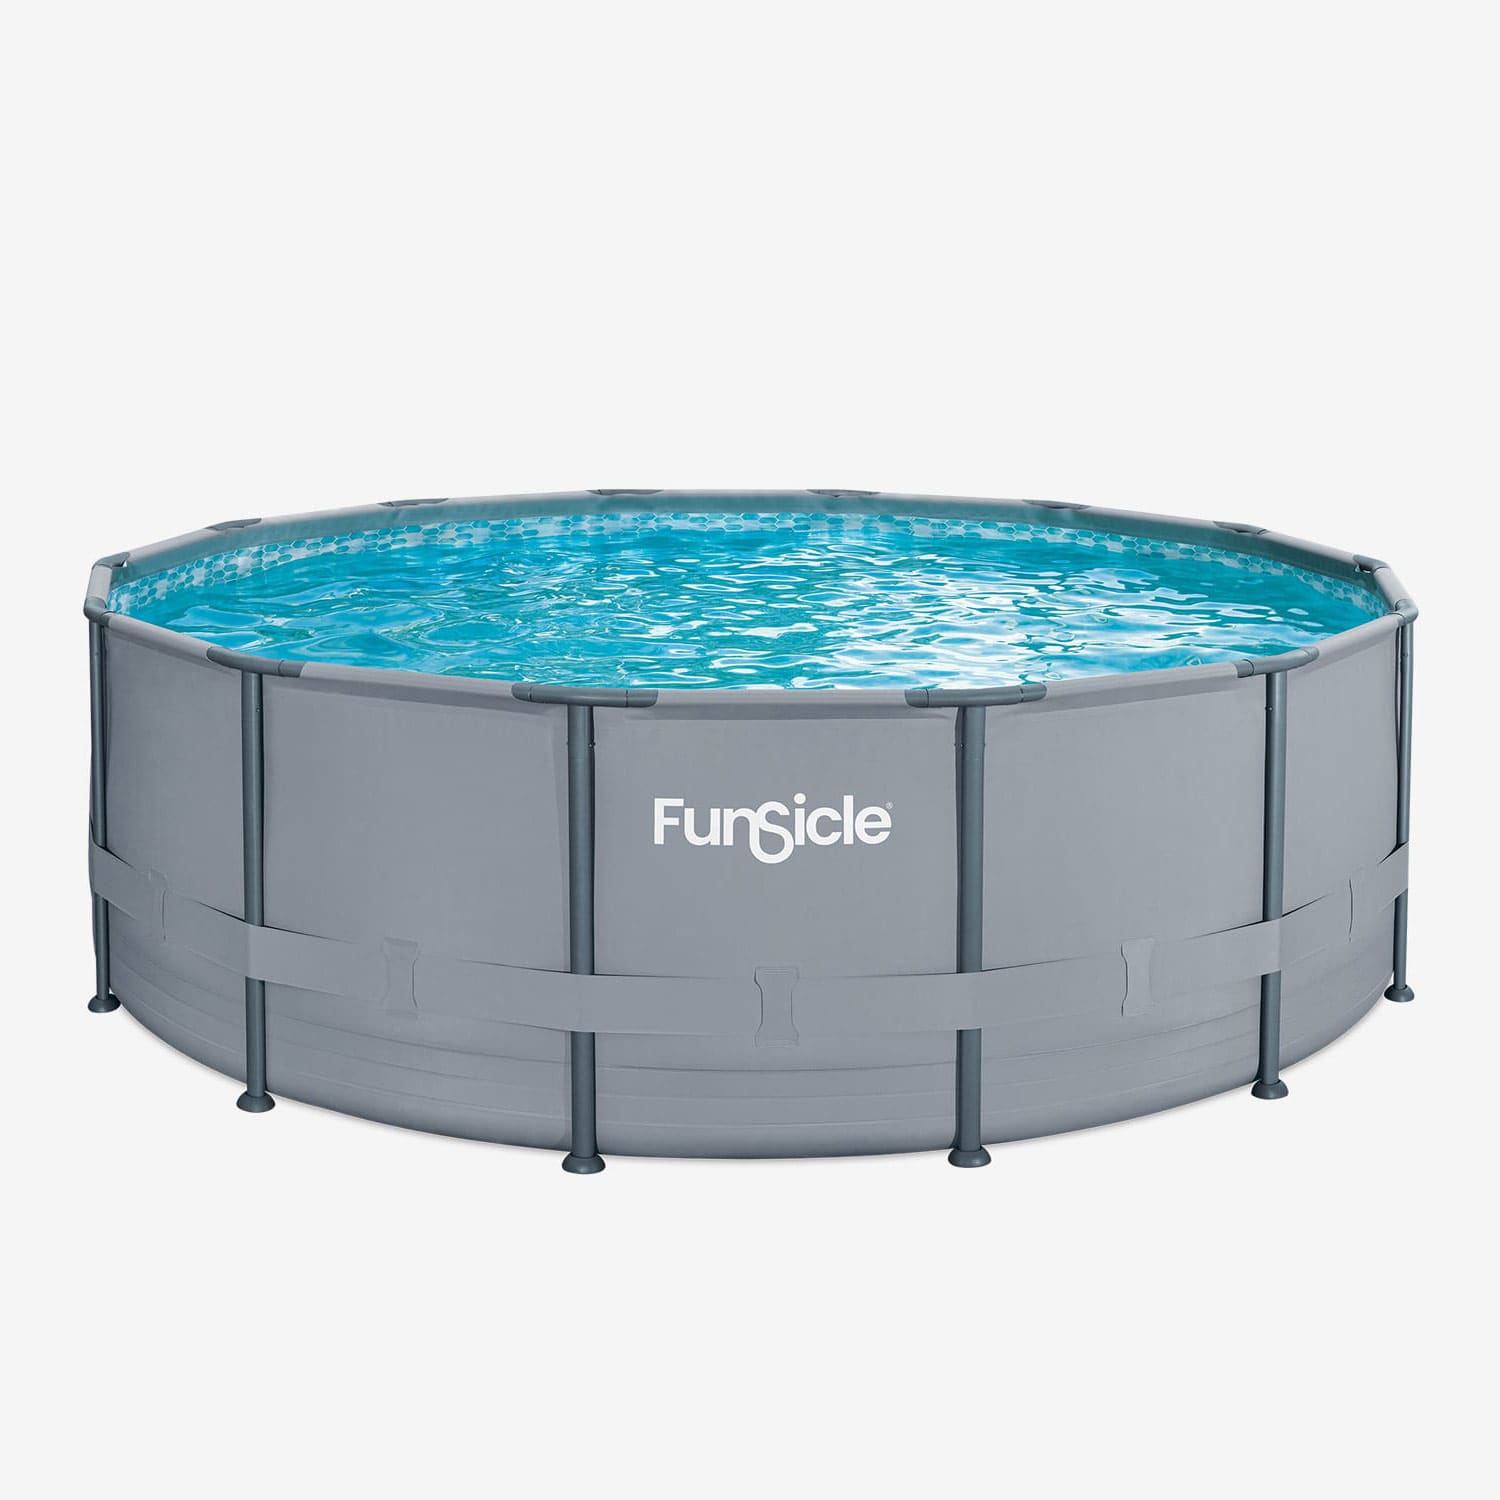 Funsicle 14 ft Oasis Pool without people